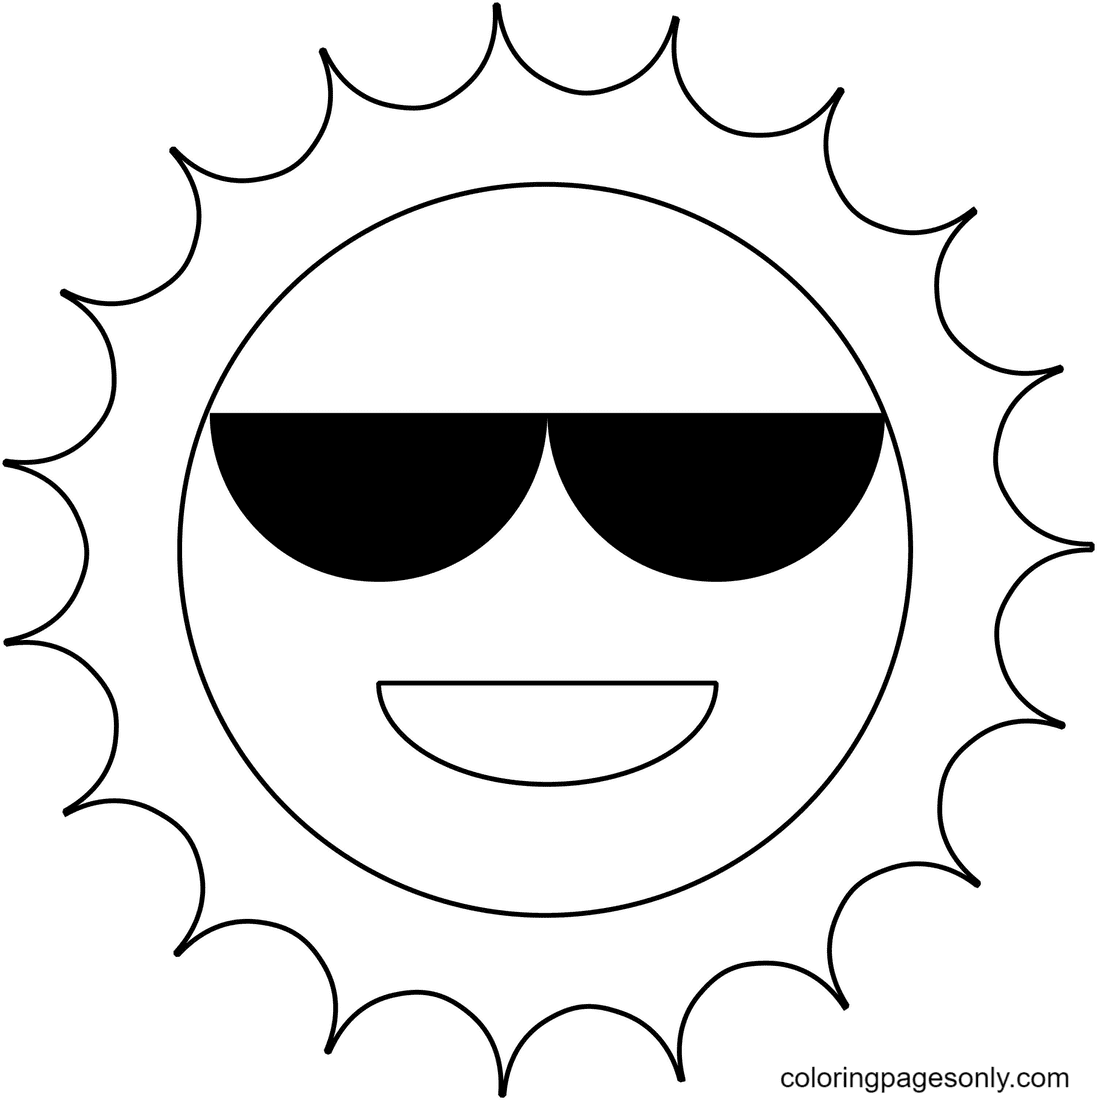 Sun and Sunglasses Coloring Pages